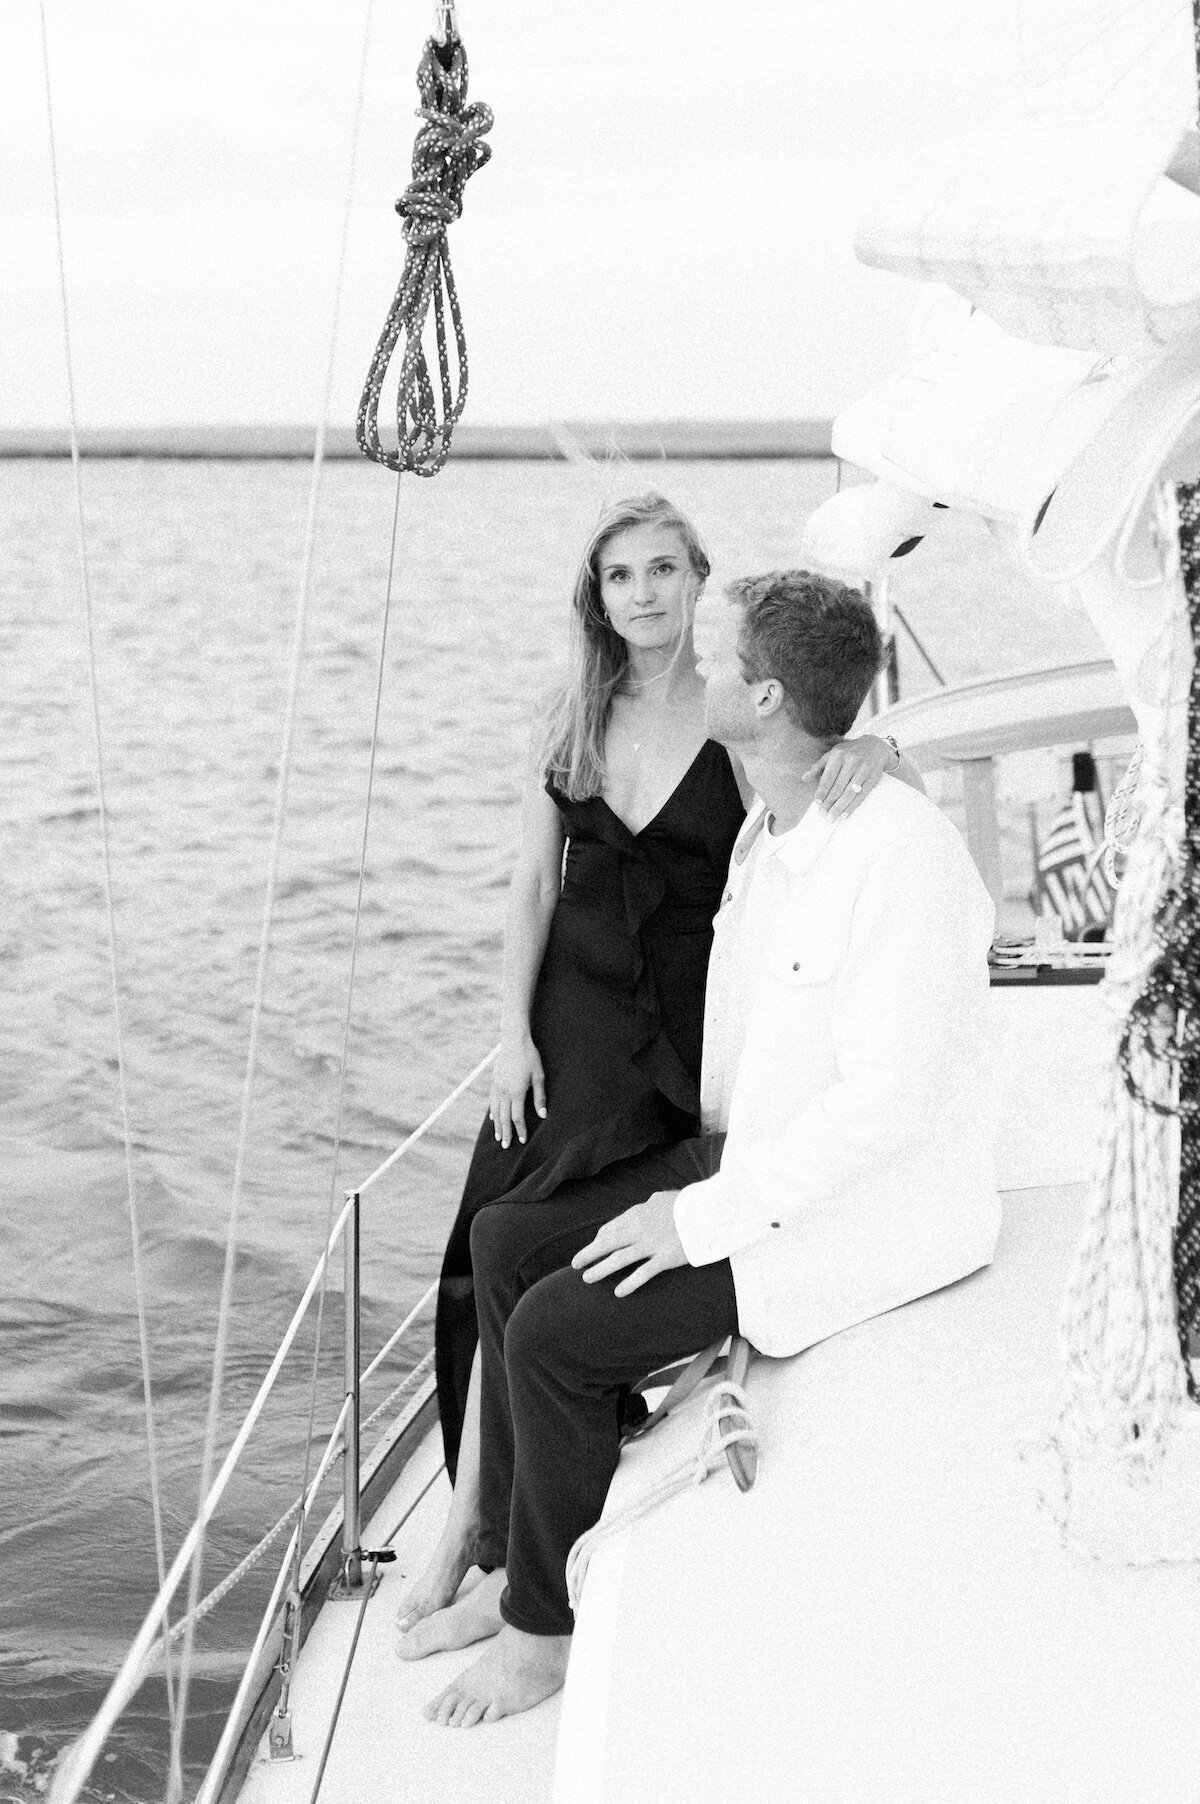 Elevate your engagement memories with the artful touch of our luxury sessions. Our editorial approach transforms your love into a visual narrative, embracing both the adventure and editorial aesthetics.